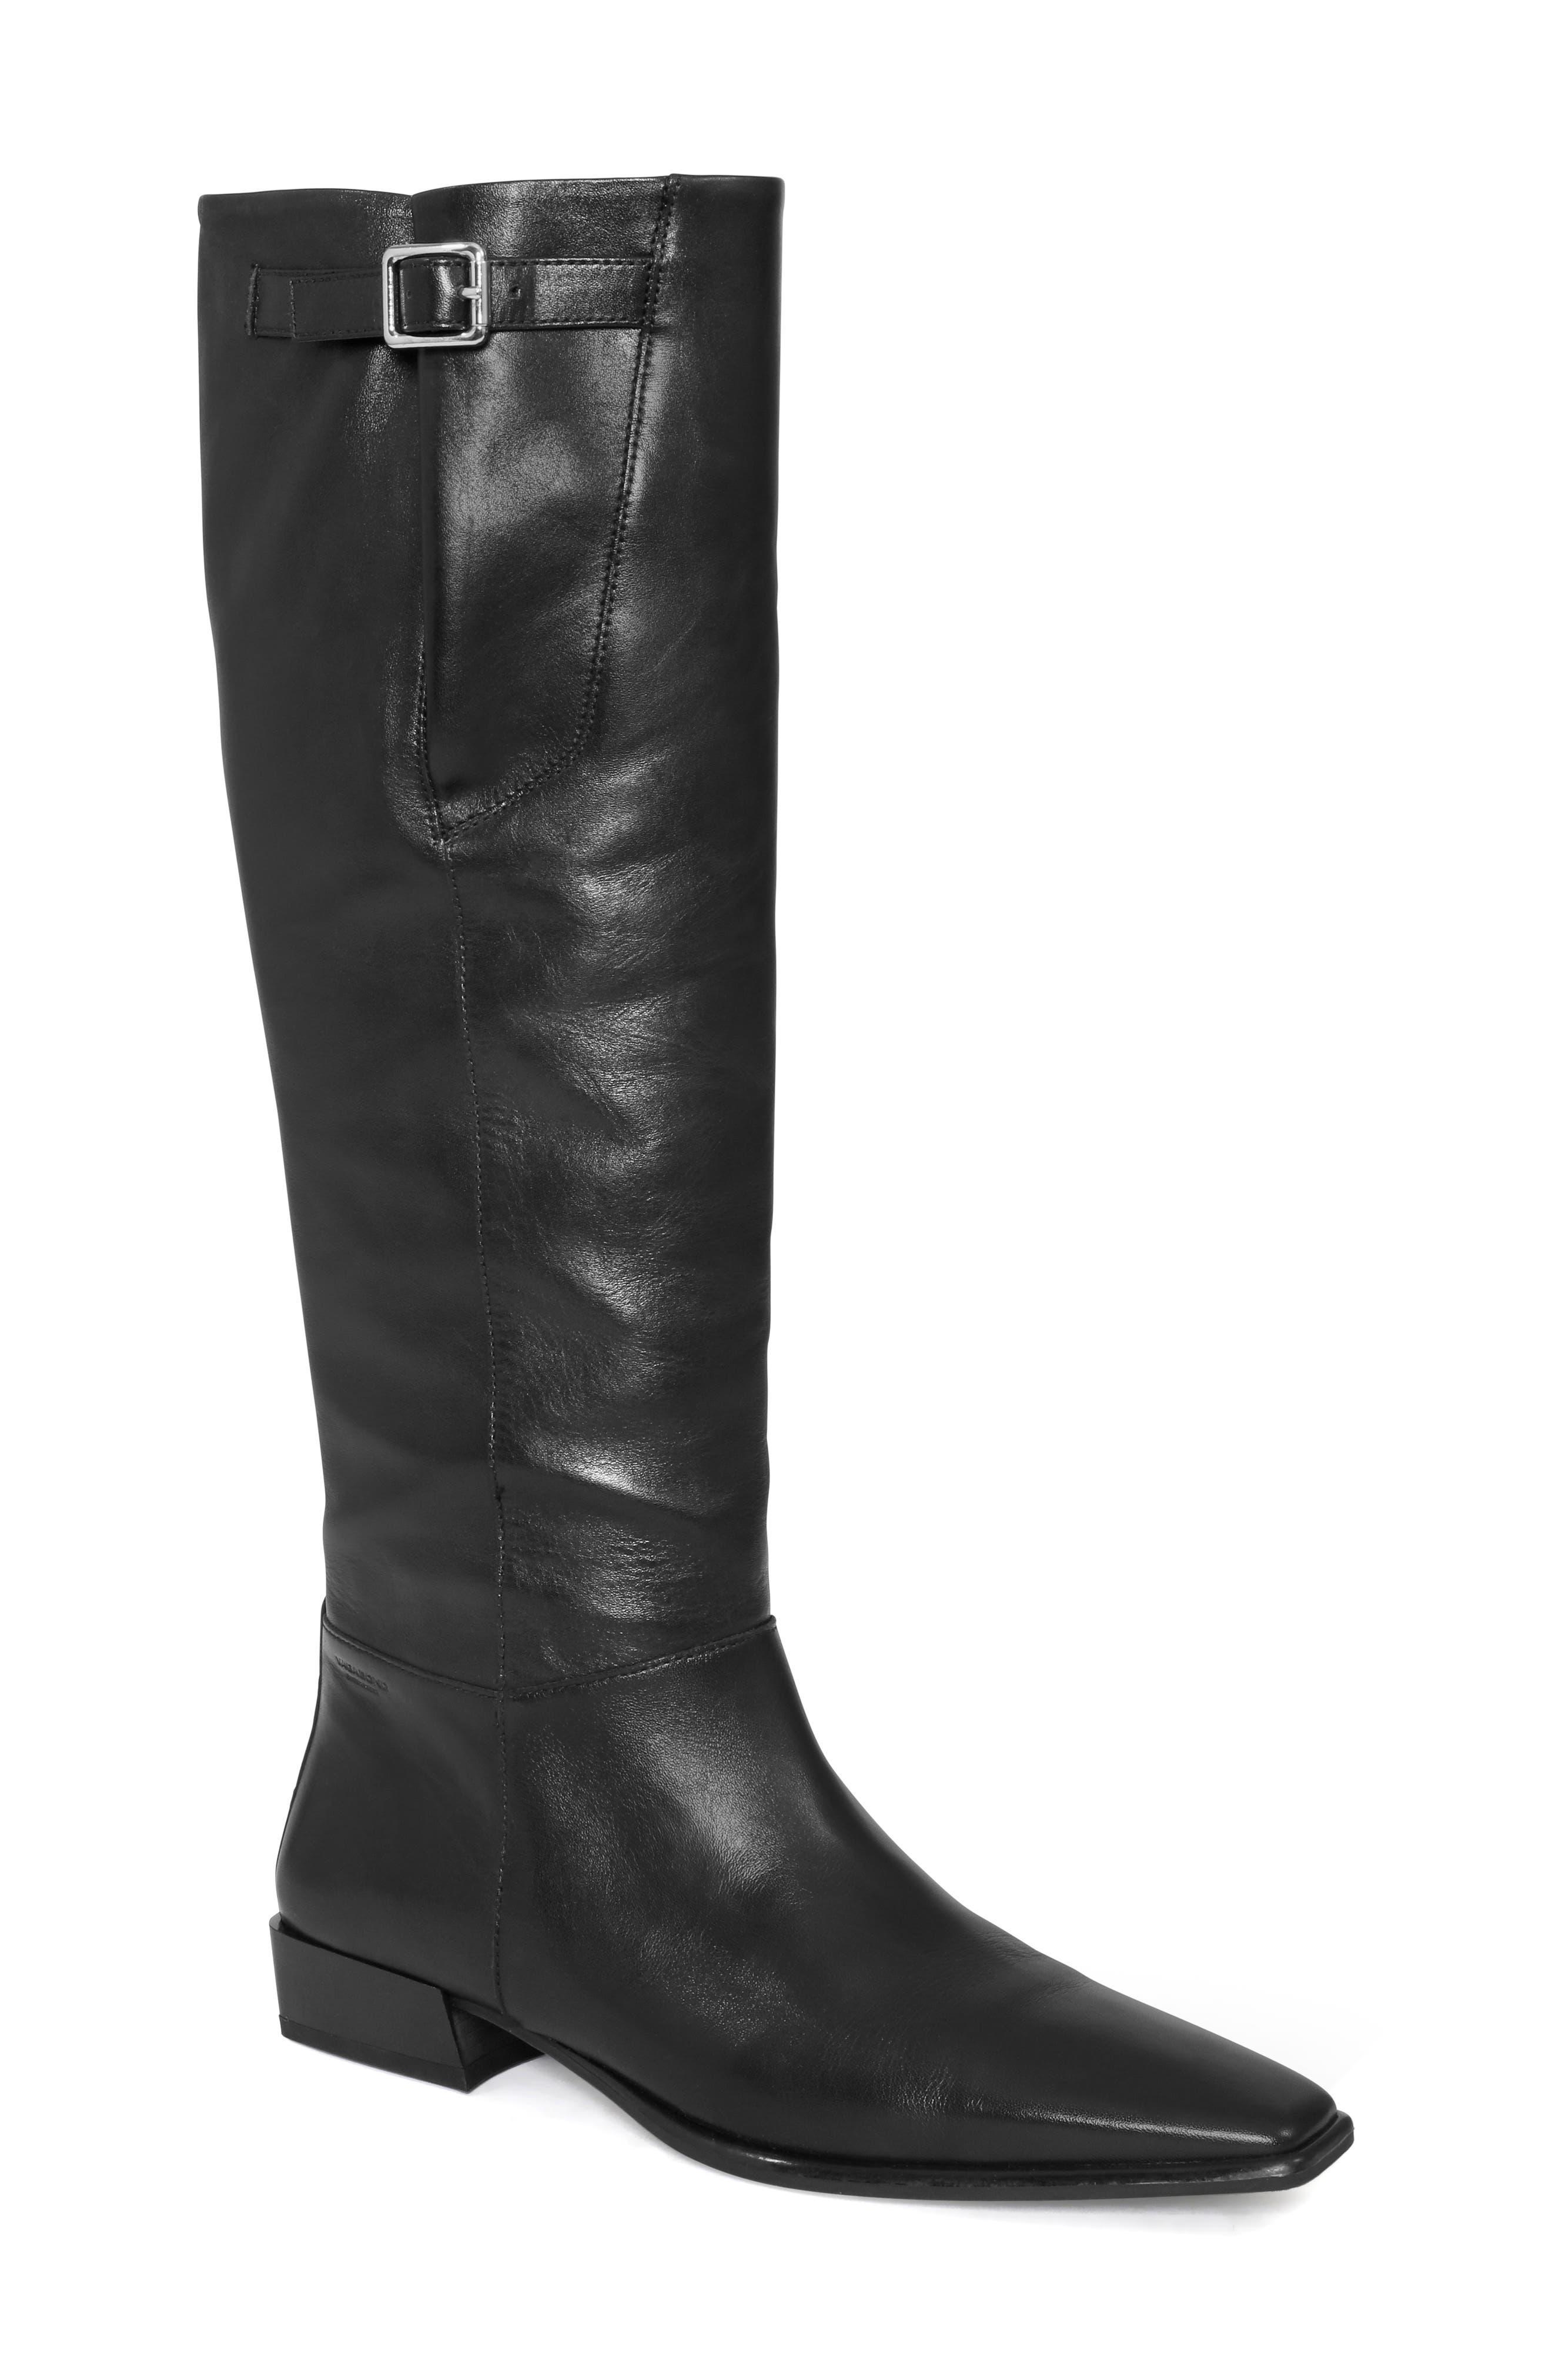 Vagabond Shoemakers Nella Over The Knee Boot in Black | Lyst